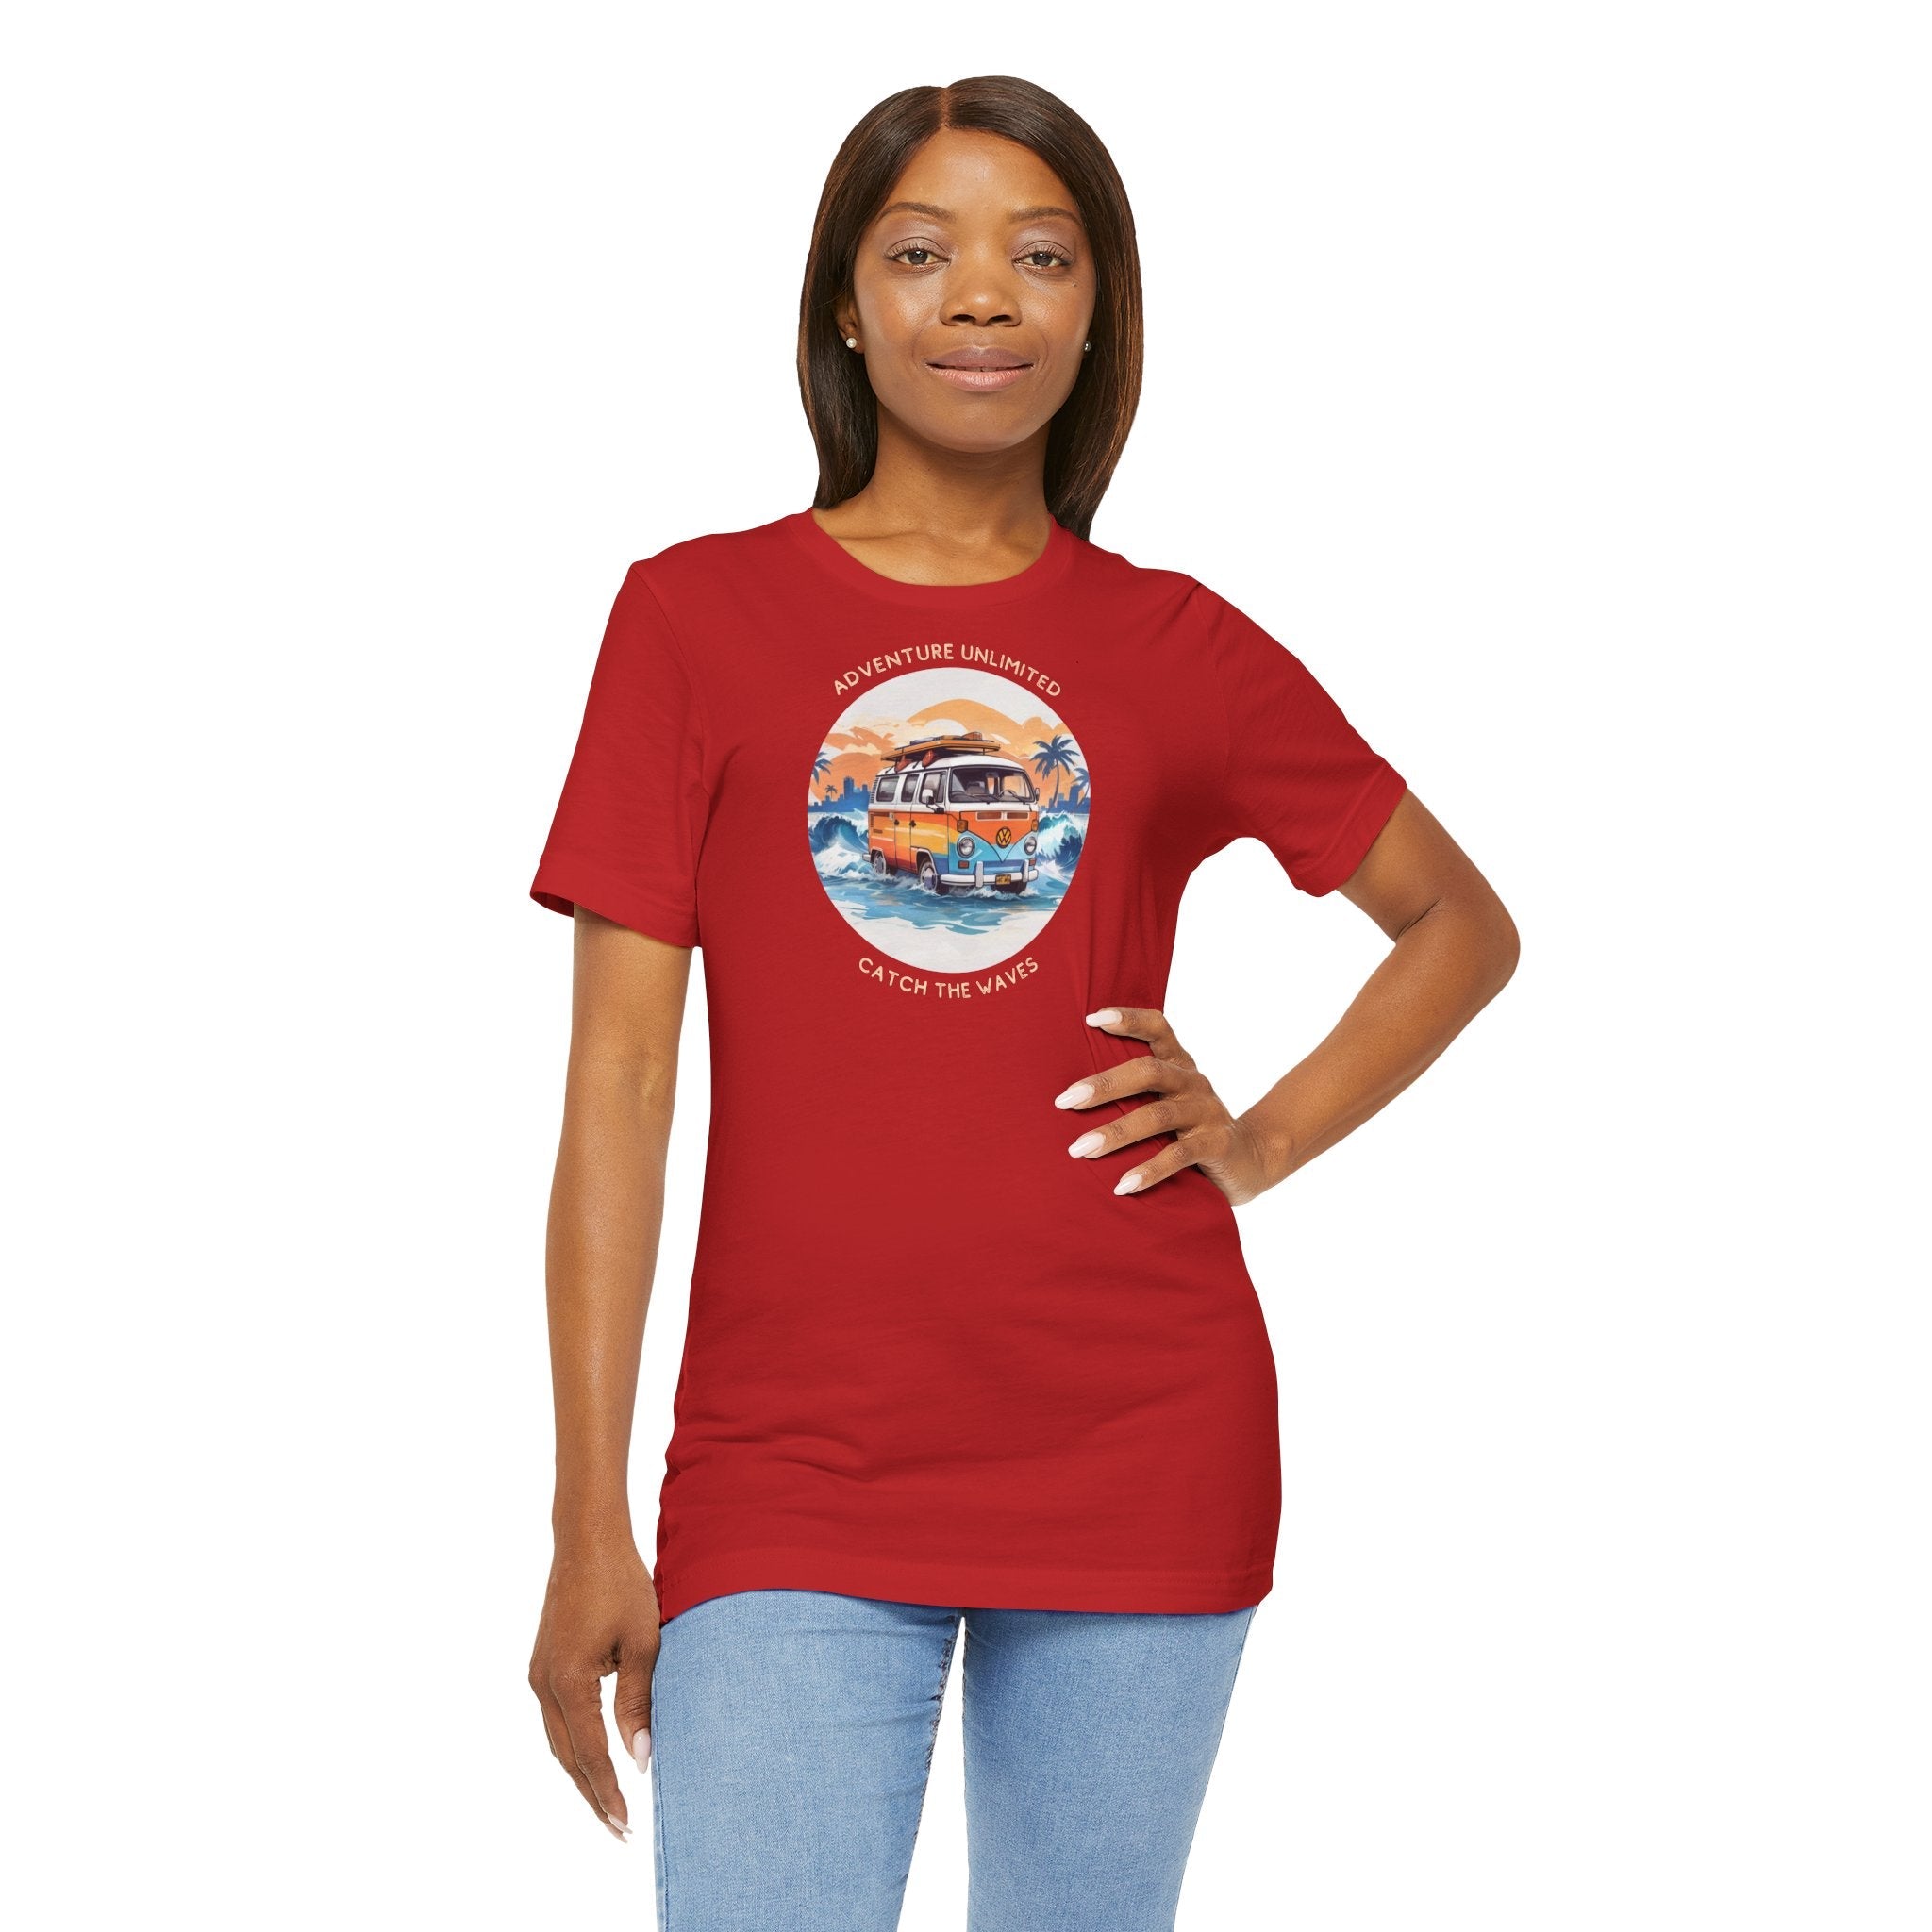 Red direct-to-garment printed t-shirt for women from Adventure Unlimited - Surfing T-Shirt - Soulshinecreators - Bella & Canvas - EU